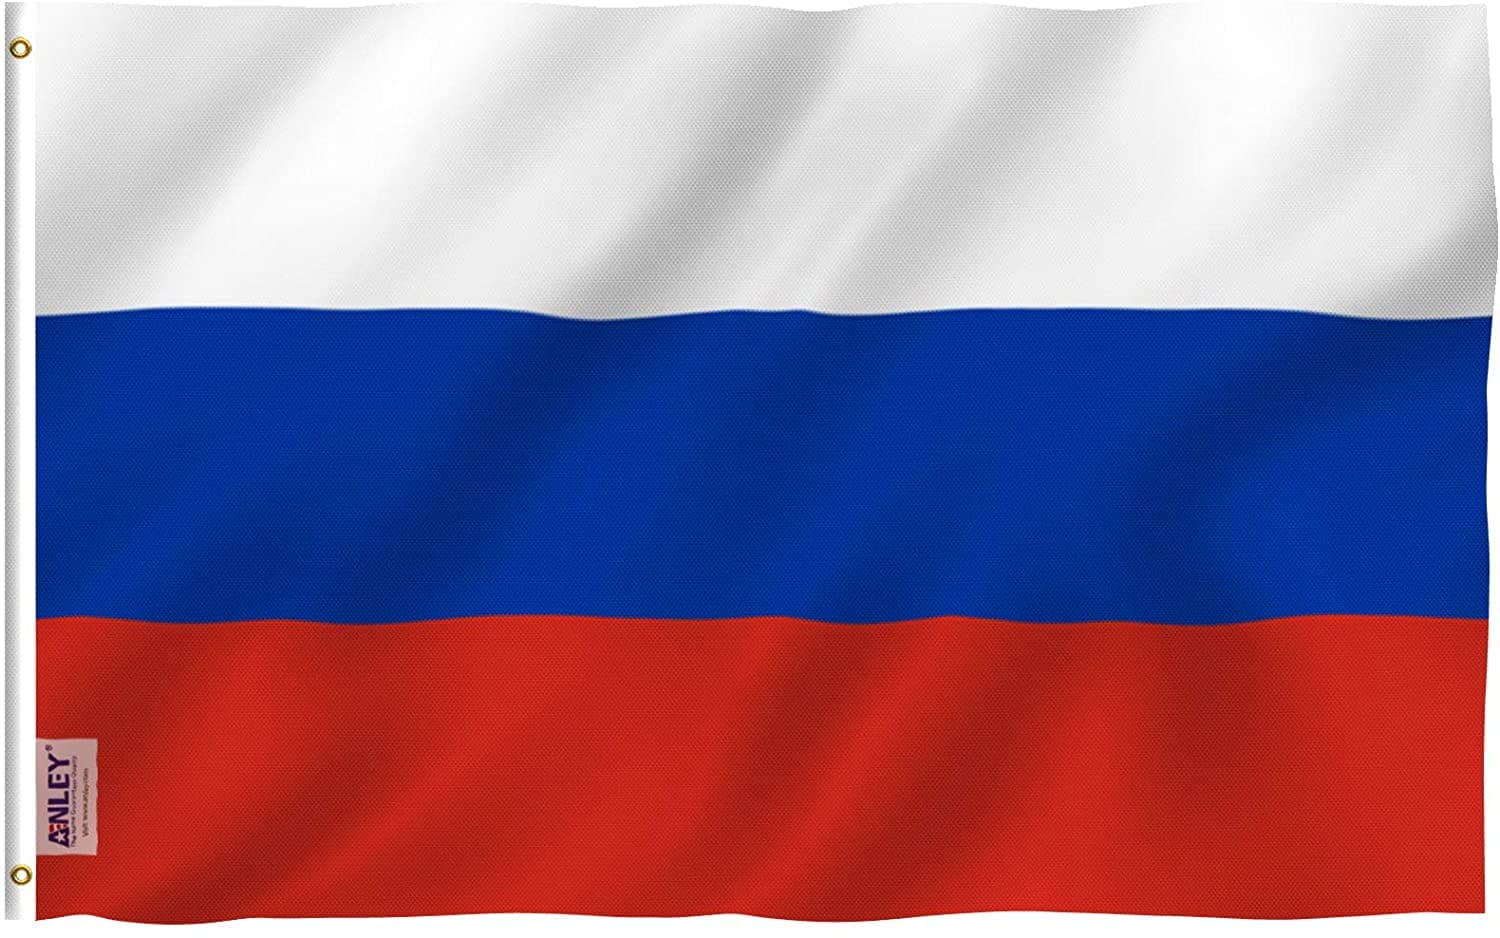 Anley Fly Breeze 3x5 Foot Russia Flag - Vivid Color and Fade proof - Canvas  Header and Double Stitched - Russian Federation National Flags Polyester